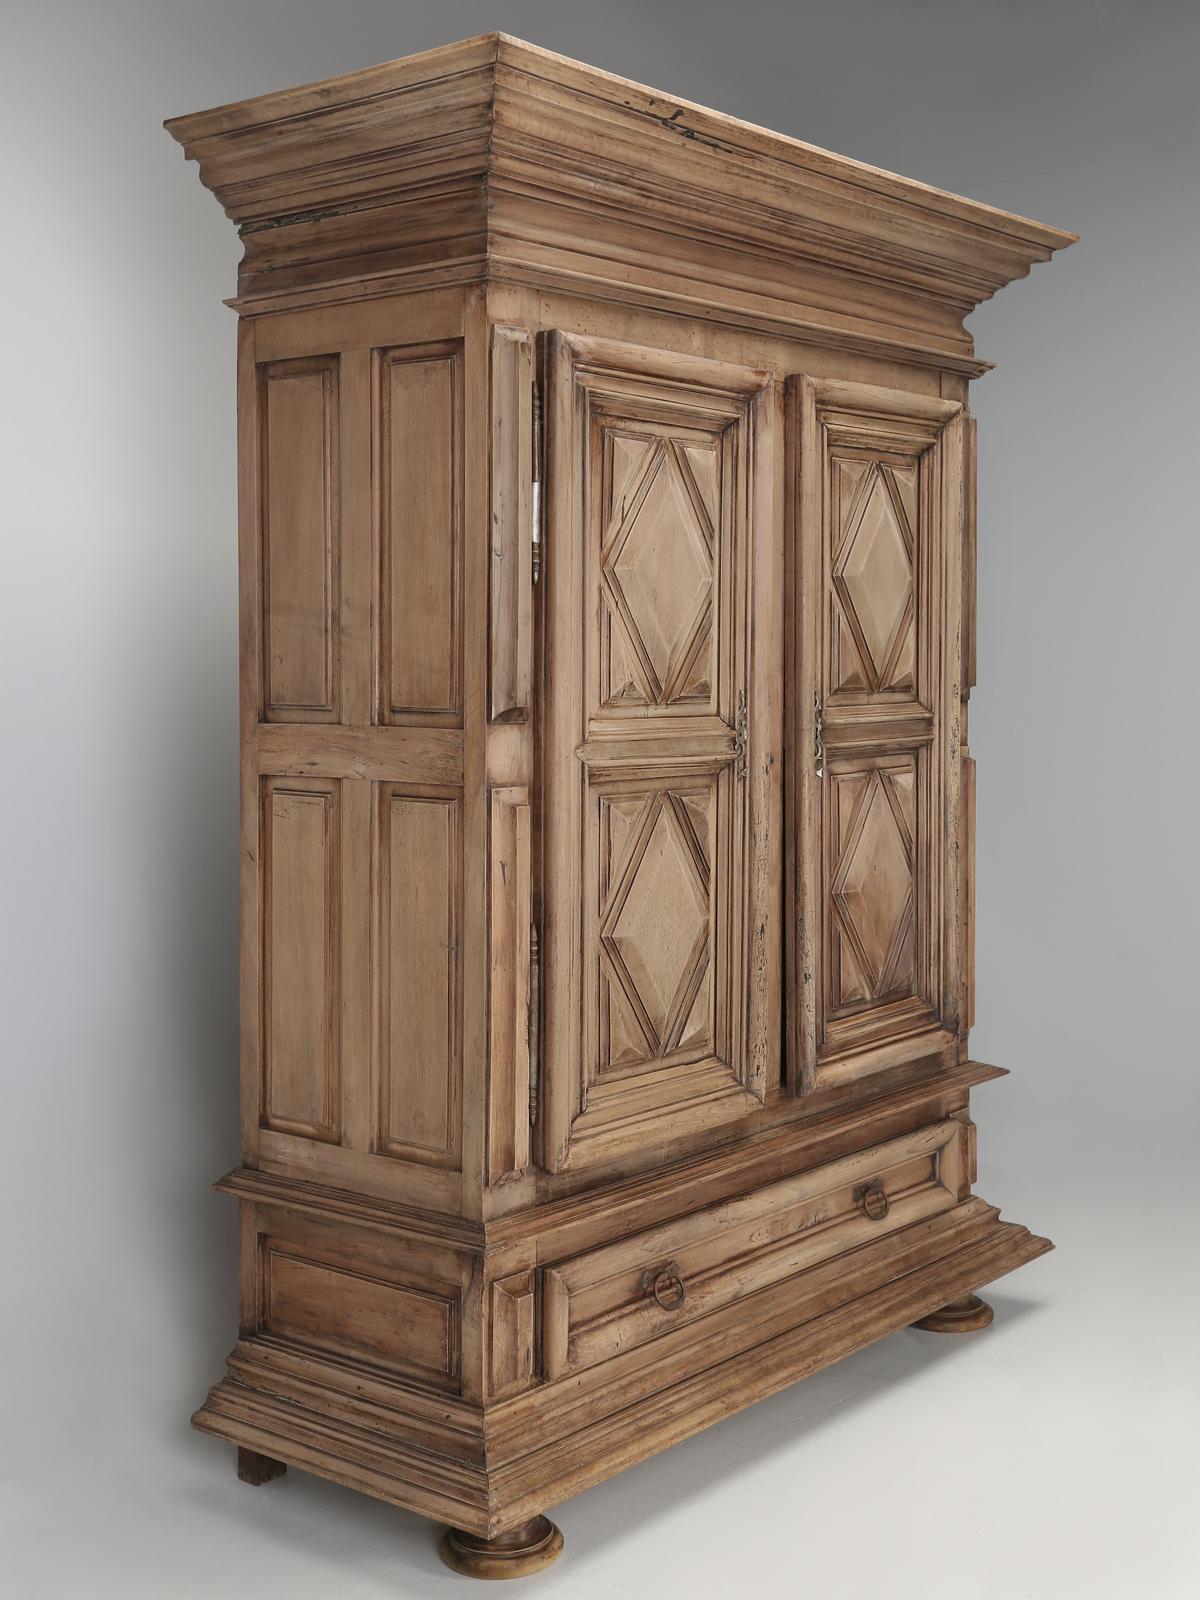 Hand-Crafted French Louis XIII Armoire circa 1700s, in Original Finish from Pamiers, France